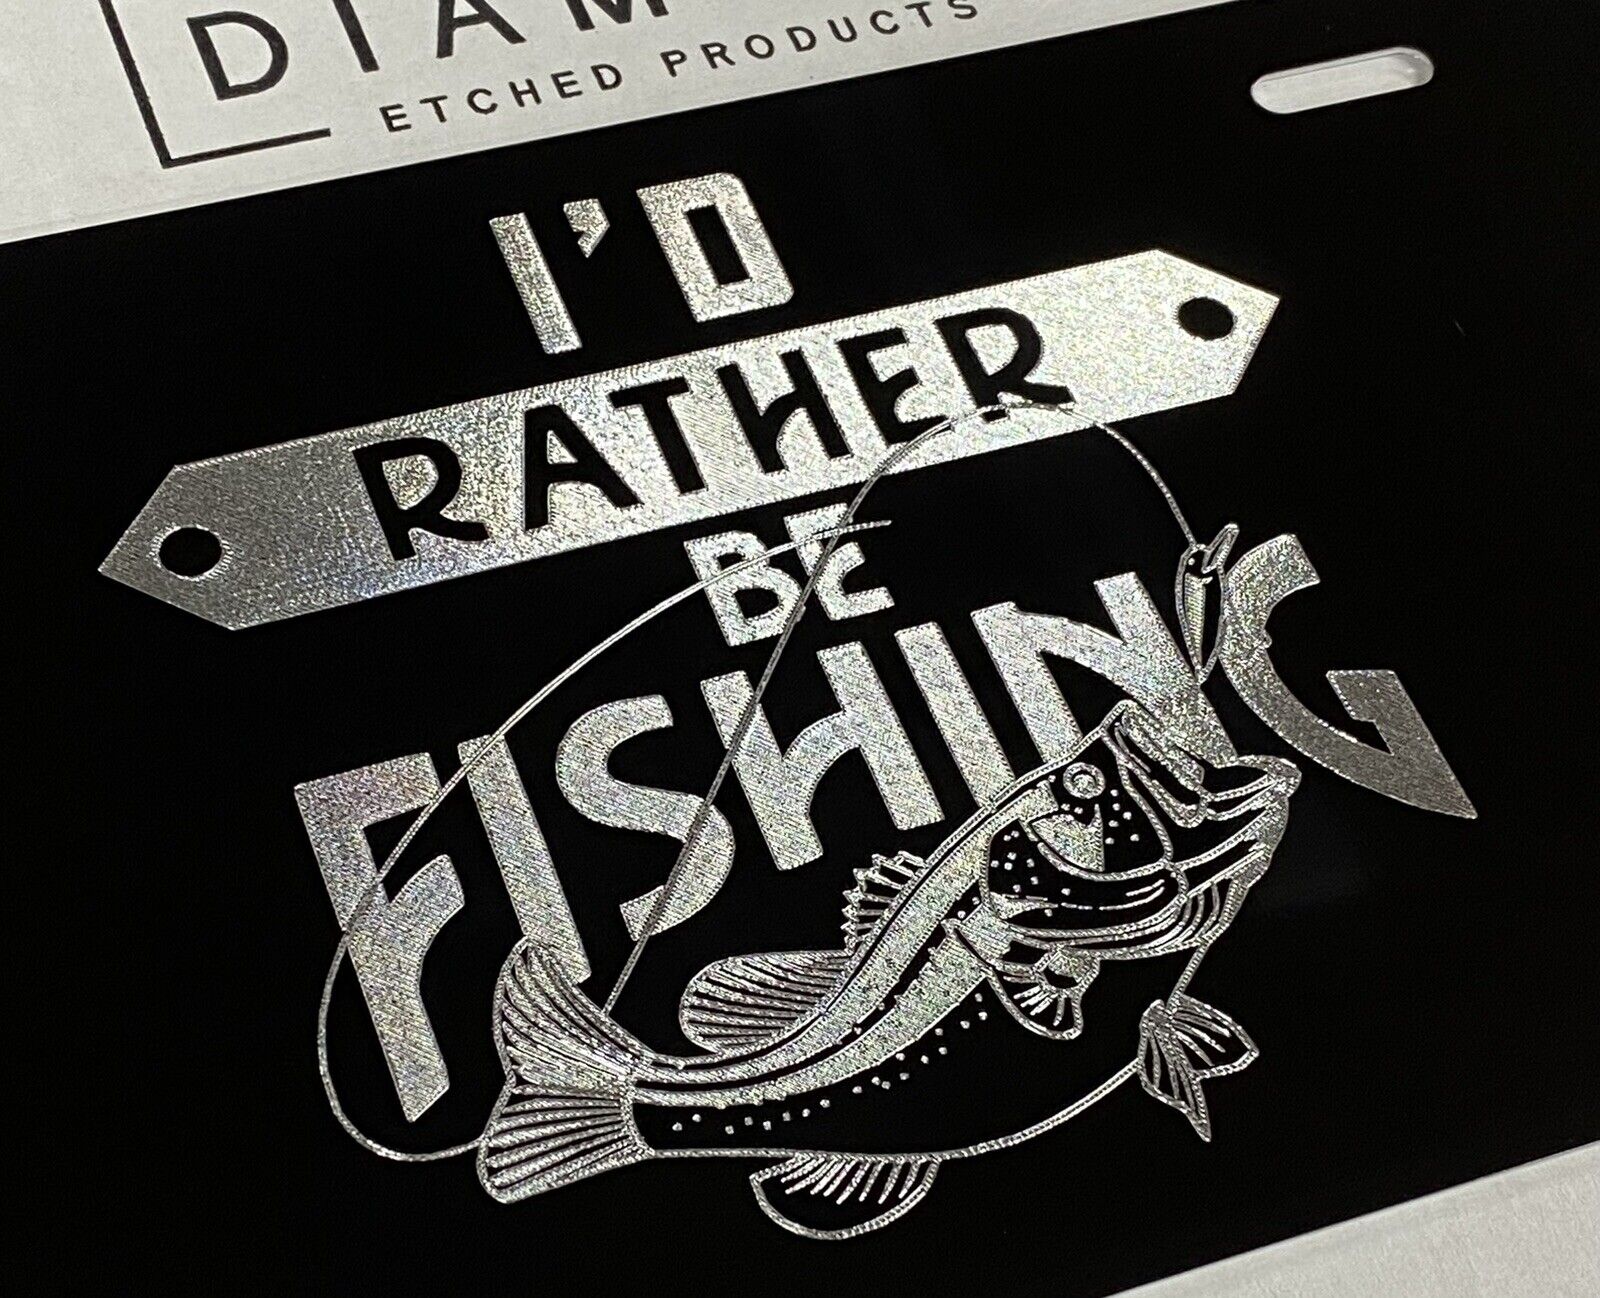 Engraved I'd rather be Fishing Car Tag Diamond Etched Aluminum License Plate